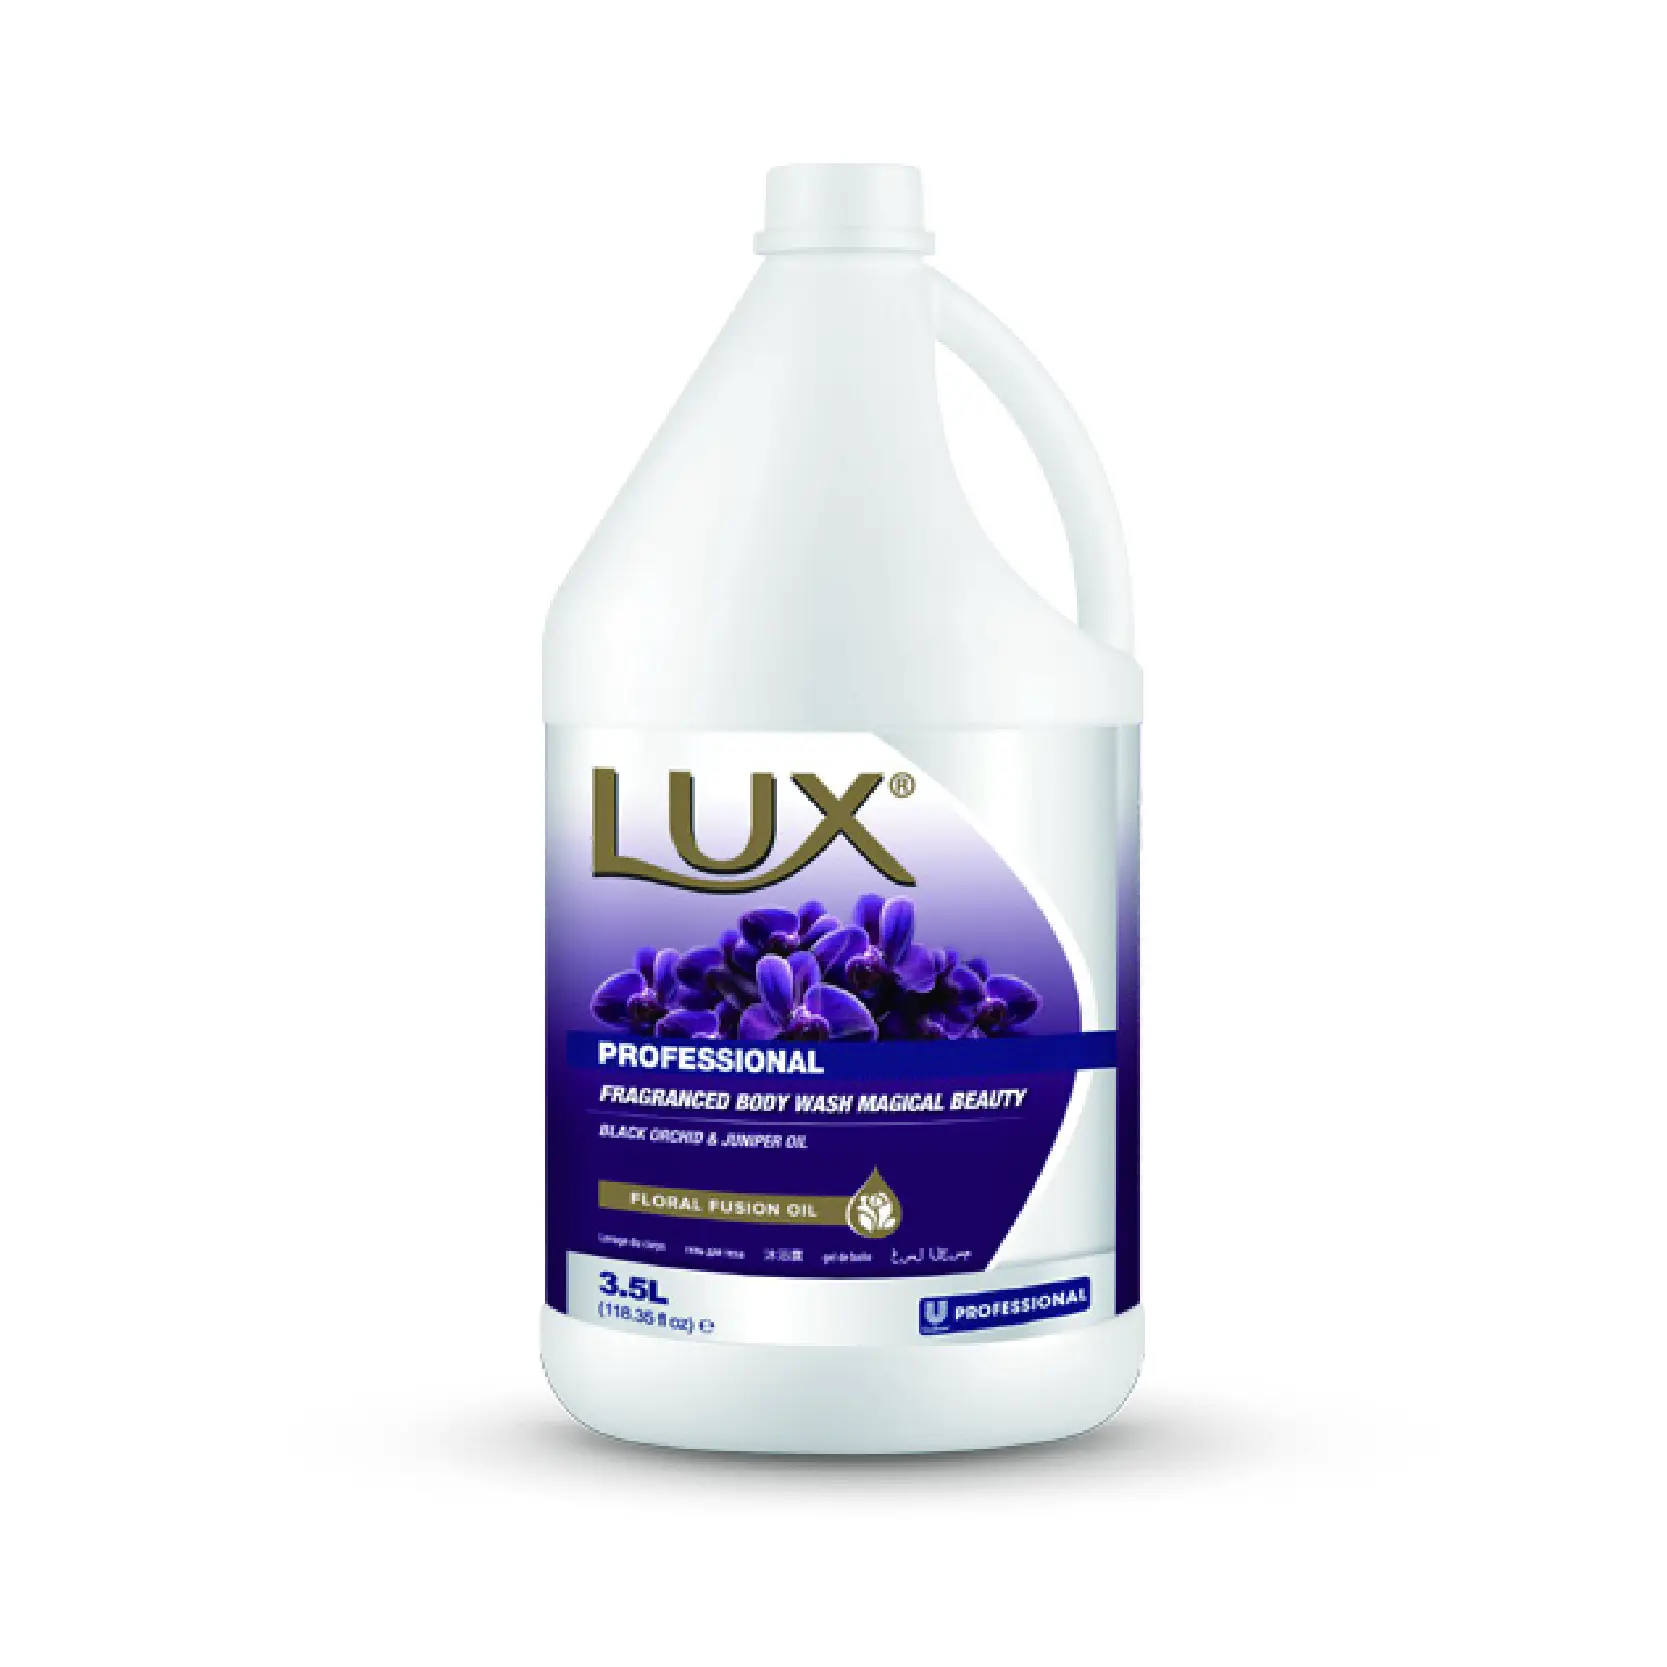 Wholesale Officially Authorized 3.5L LUX Shower Gel